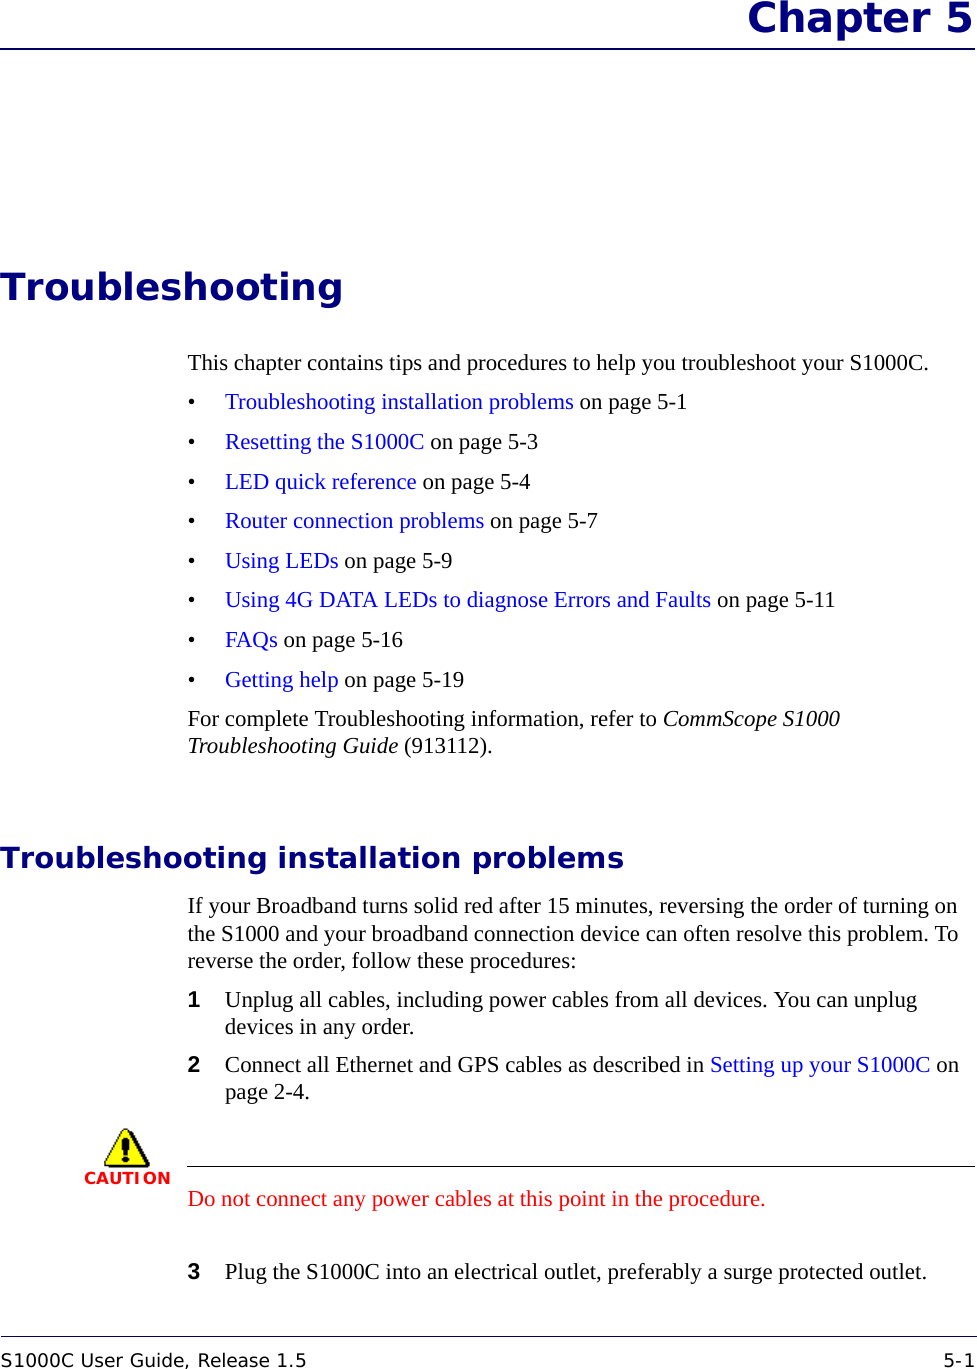 S1000C User Guide, Release 1.5 5-1DRAFT Chapter 5TroubleshootingThis chapter contains tips and procedures to help you troubleshoot your S1000C.•Troubleshooting installation problems on page 5-1•Resetting the S1000C on page 5-3•LED quick reference on page 5-4•Router connection problems on page 5-7•Using LEDs on page 5-9•Using 4G DATA LEDs to diagnose Errors and Faults on page 5-11•FAQs on page 5-16•Getting help on page 5-19For complete Troubleshooting information, refer to CommScope S1000 Troubleshooting Guide (913112).Troubleshooting installation problemsIf your Broadband turns solid red after 15 minutes, reversing the order of turning on the S1000 and your broadband connection device can often resolve this problem. To reverse the order, follow these procedures:1Unplug all cables, including power cables from all devices. You can unplug devices in any order.2Connect all Ethernet and GPS cables as described in Setting up your S1000C on page 2-4.CAUTIONDo not connect any power cables at this point in the procedure.3Plug the S1000C into an electrical outlet, preferably a surge protected outlet.